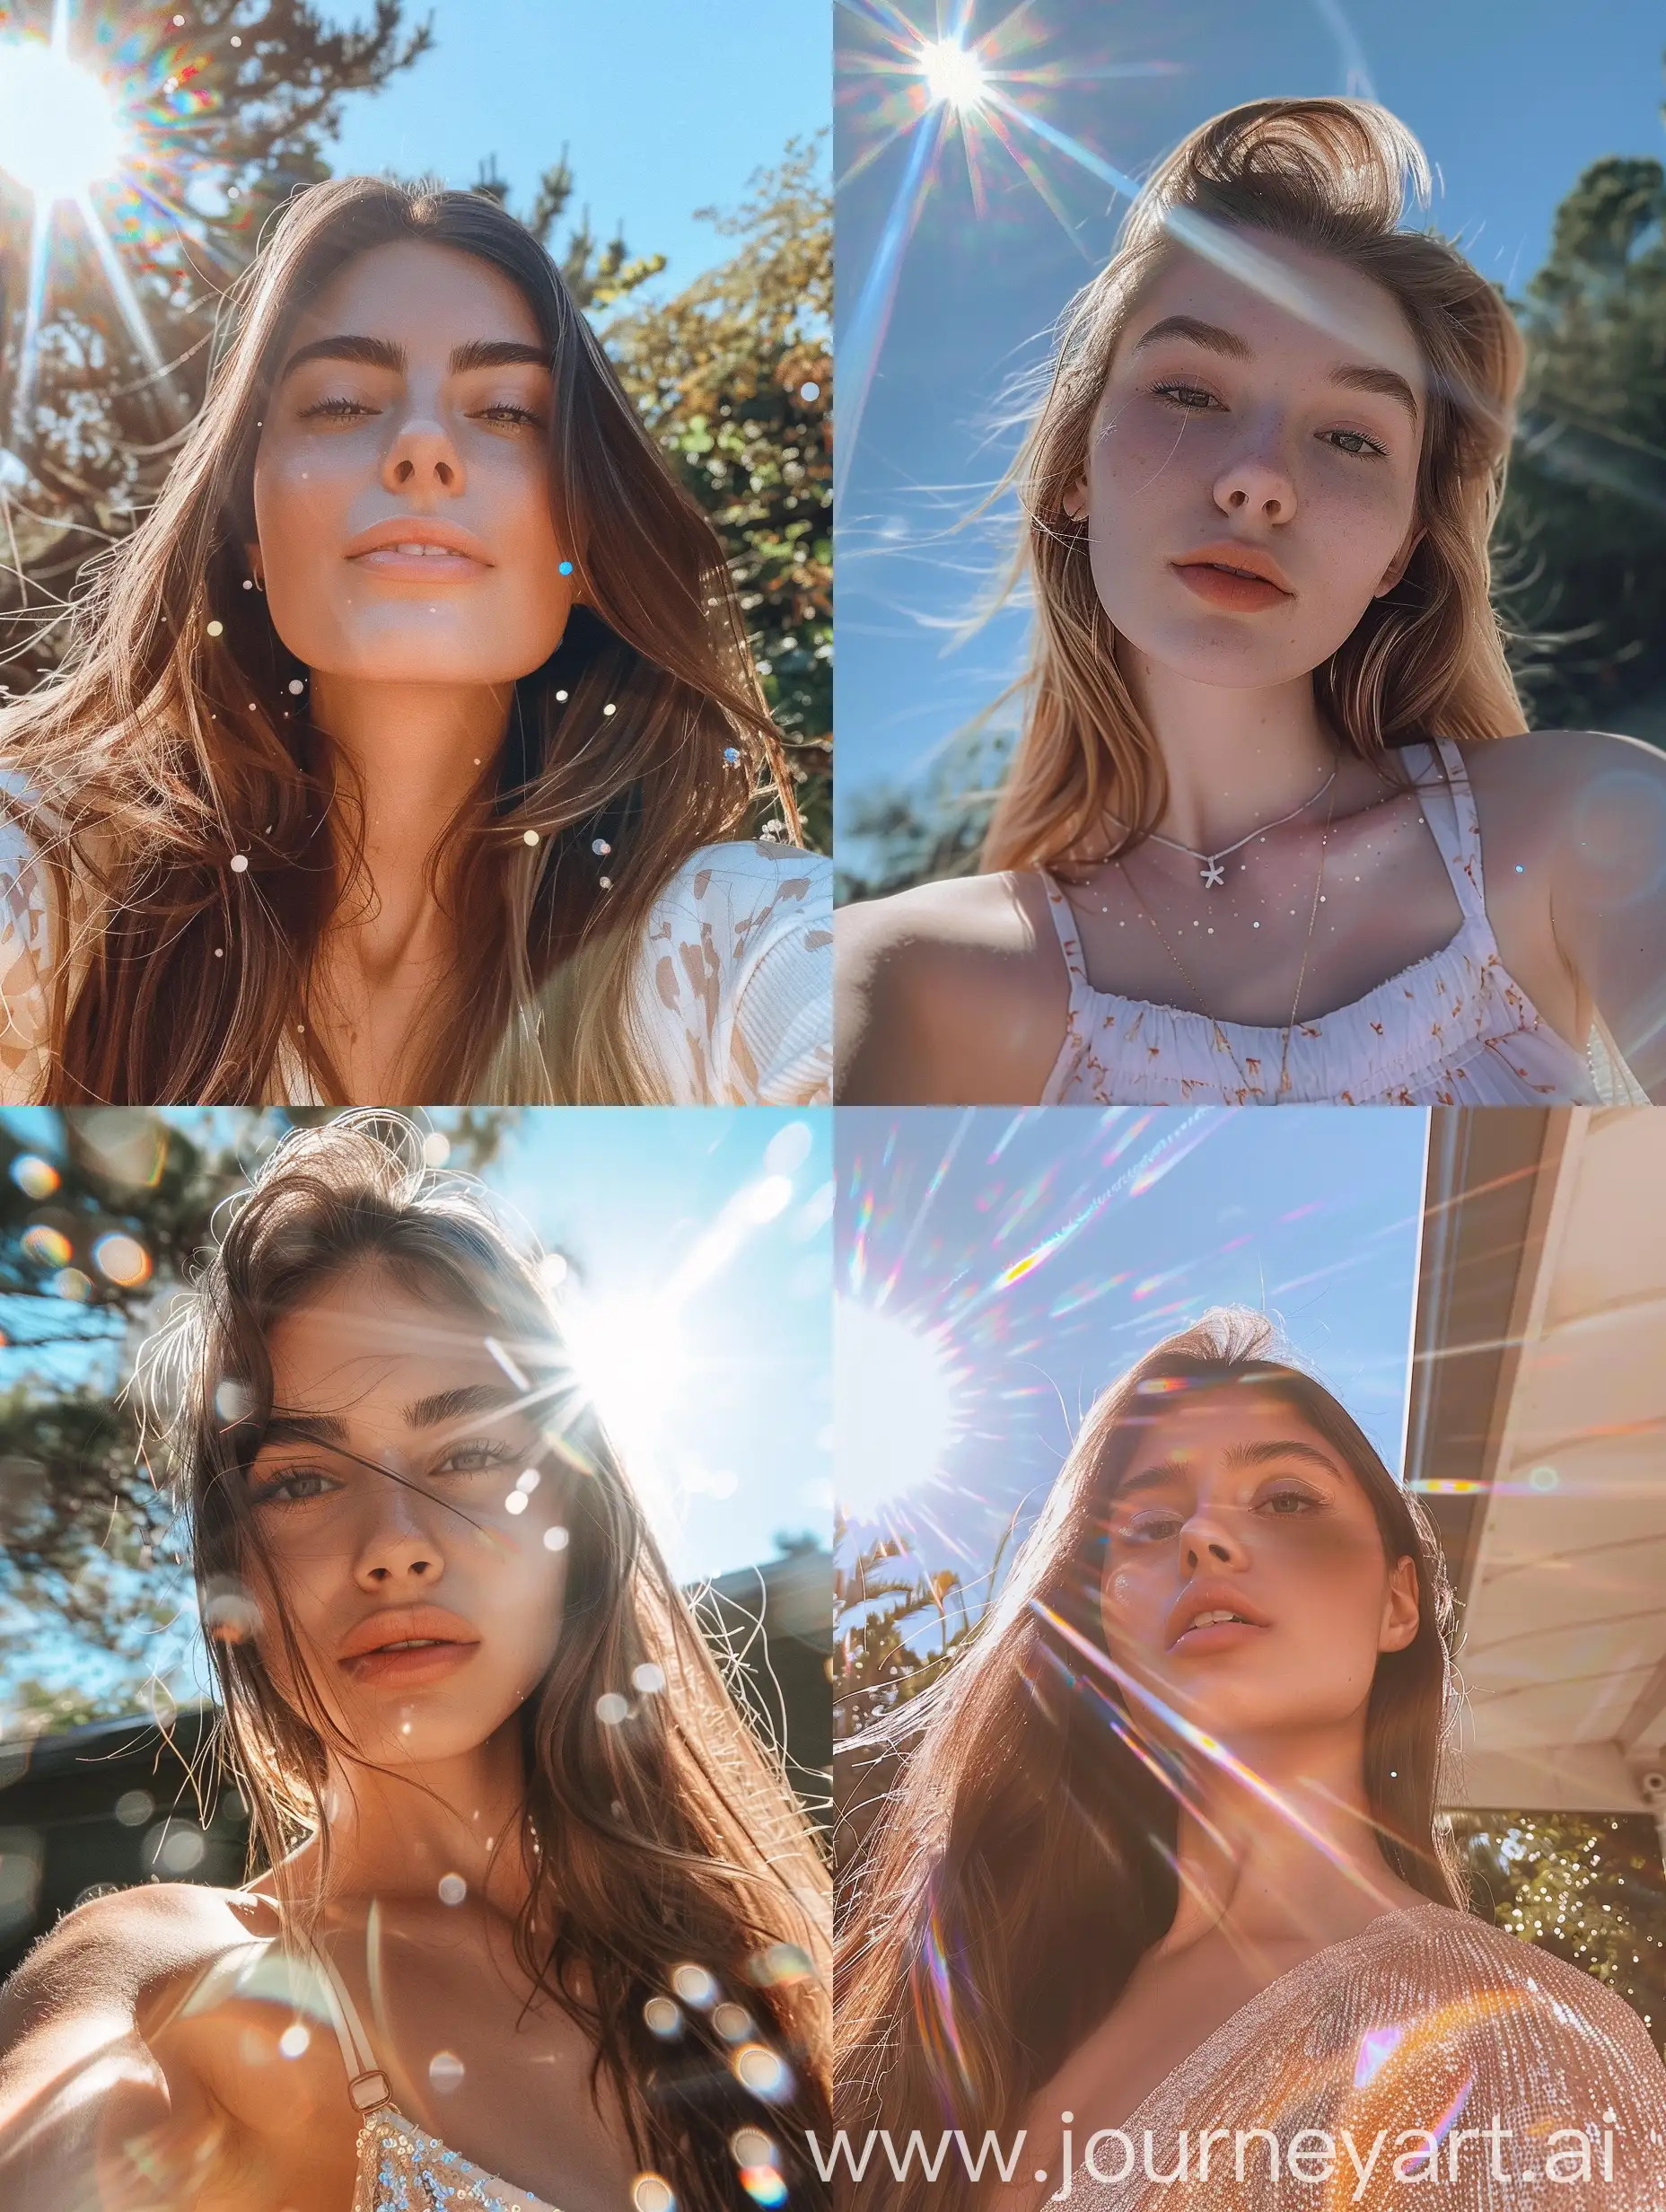 Sunlit-Beauty-Influencer-Capturing-Selfie-on-a-Sunny-Day